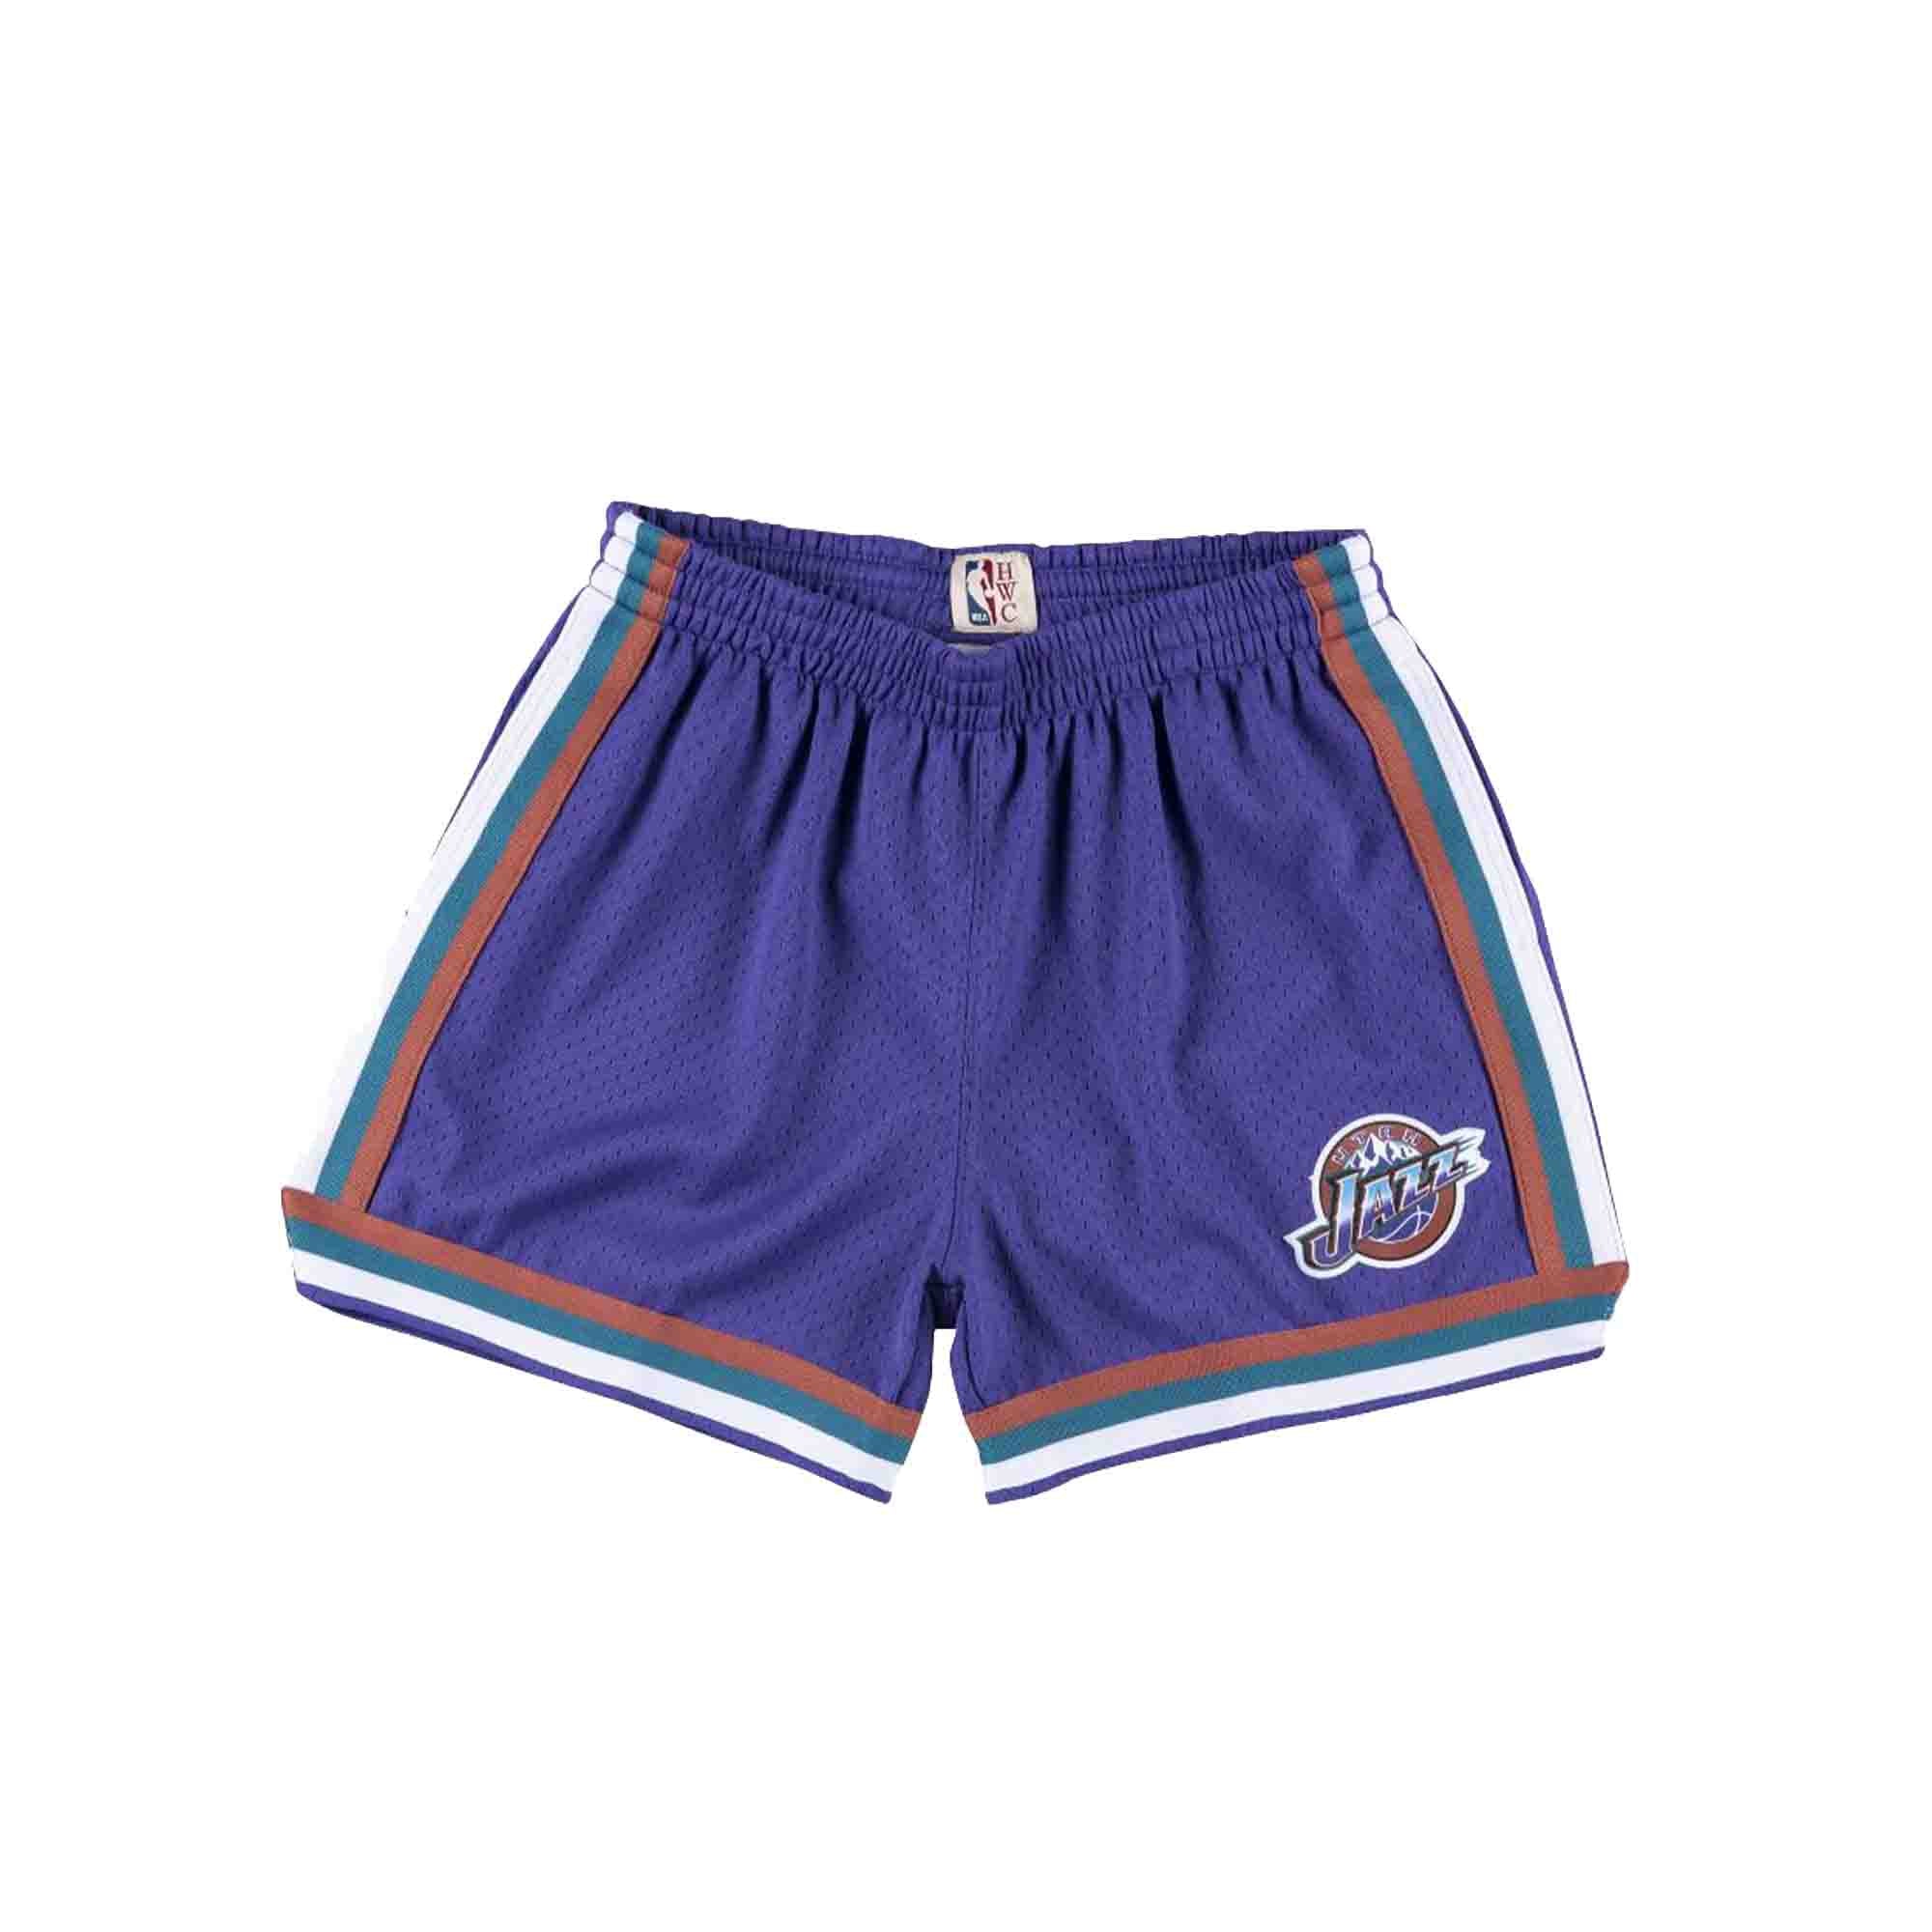 Mitchell & Ness Jump Shot Shorts Vancouver Grizzlies XL / Teal